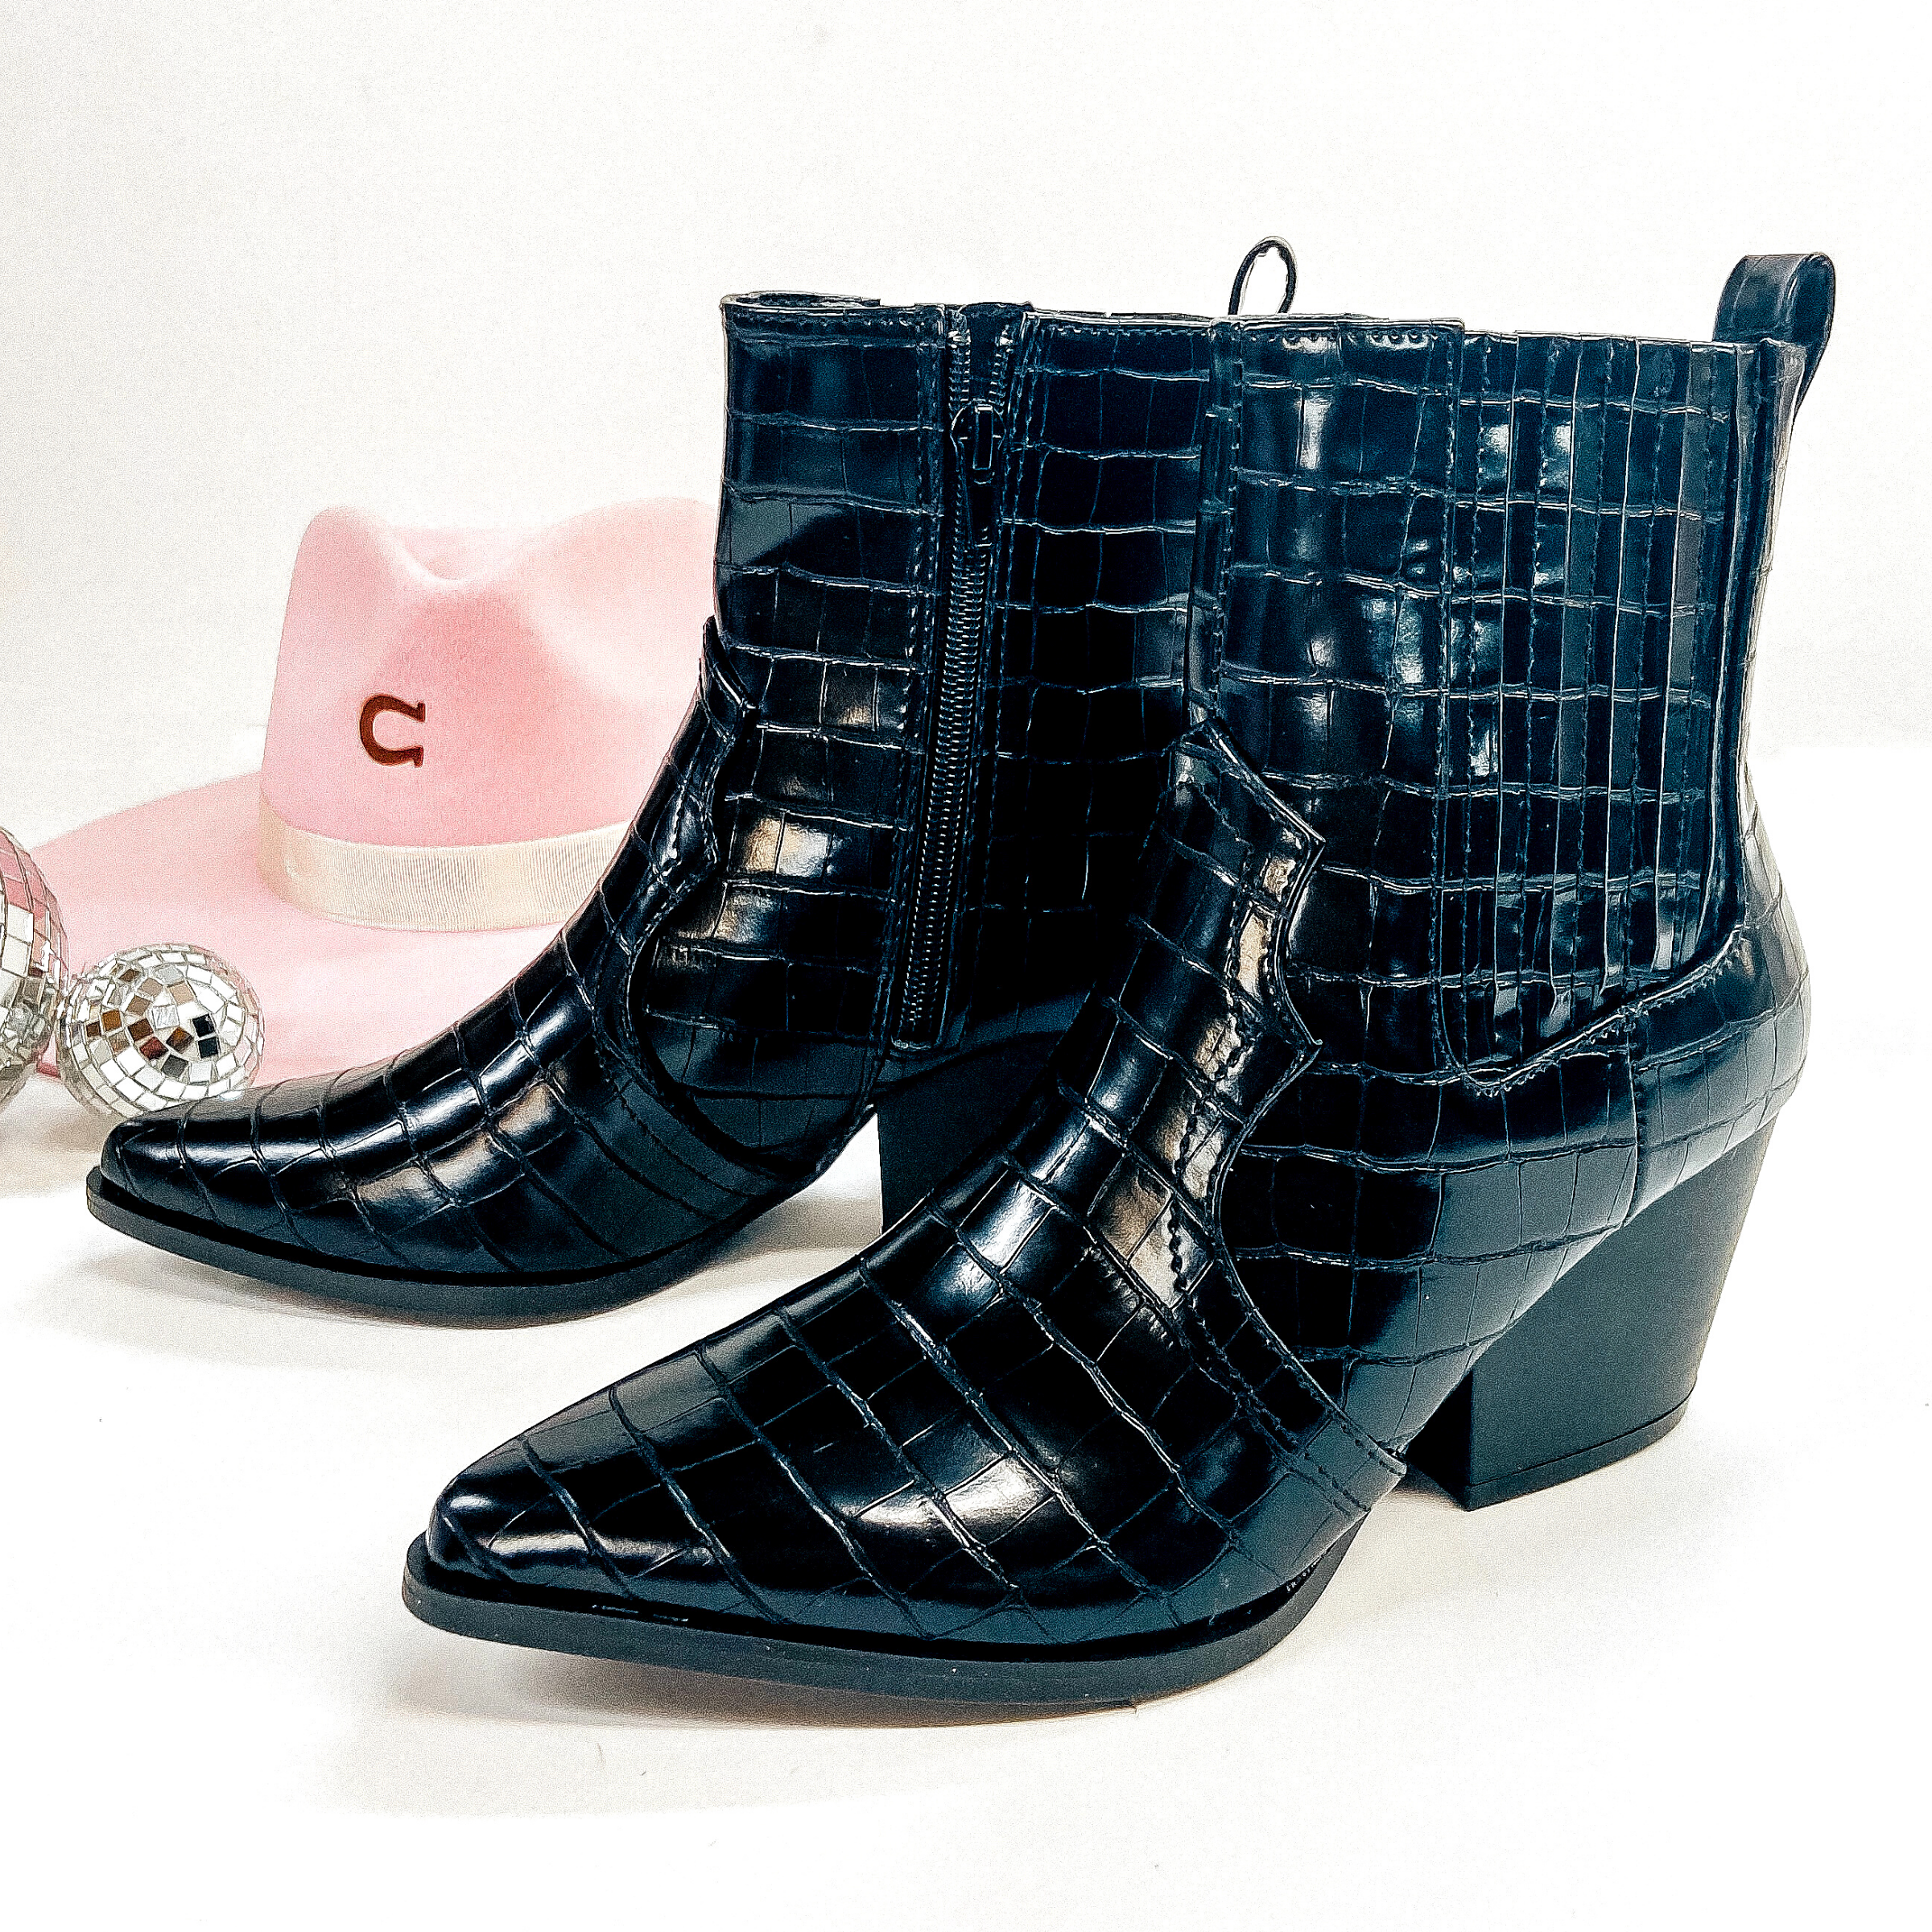 Strutin' Through Sedona Croc Print Western Heeled Booties in Black - Giddy Up Glamour Boutique